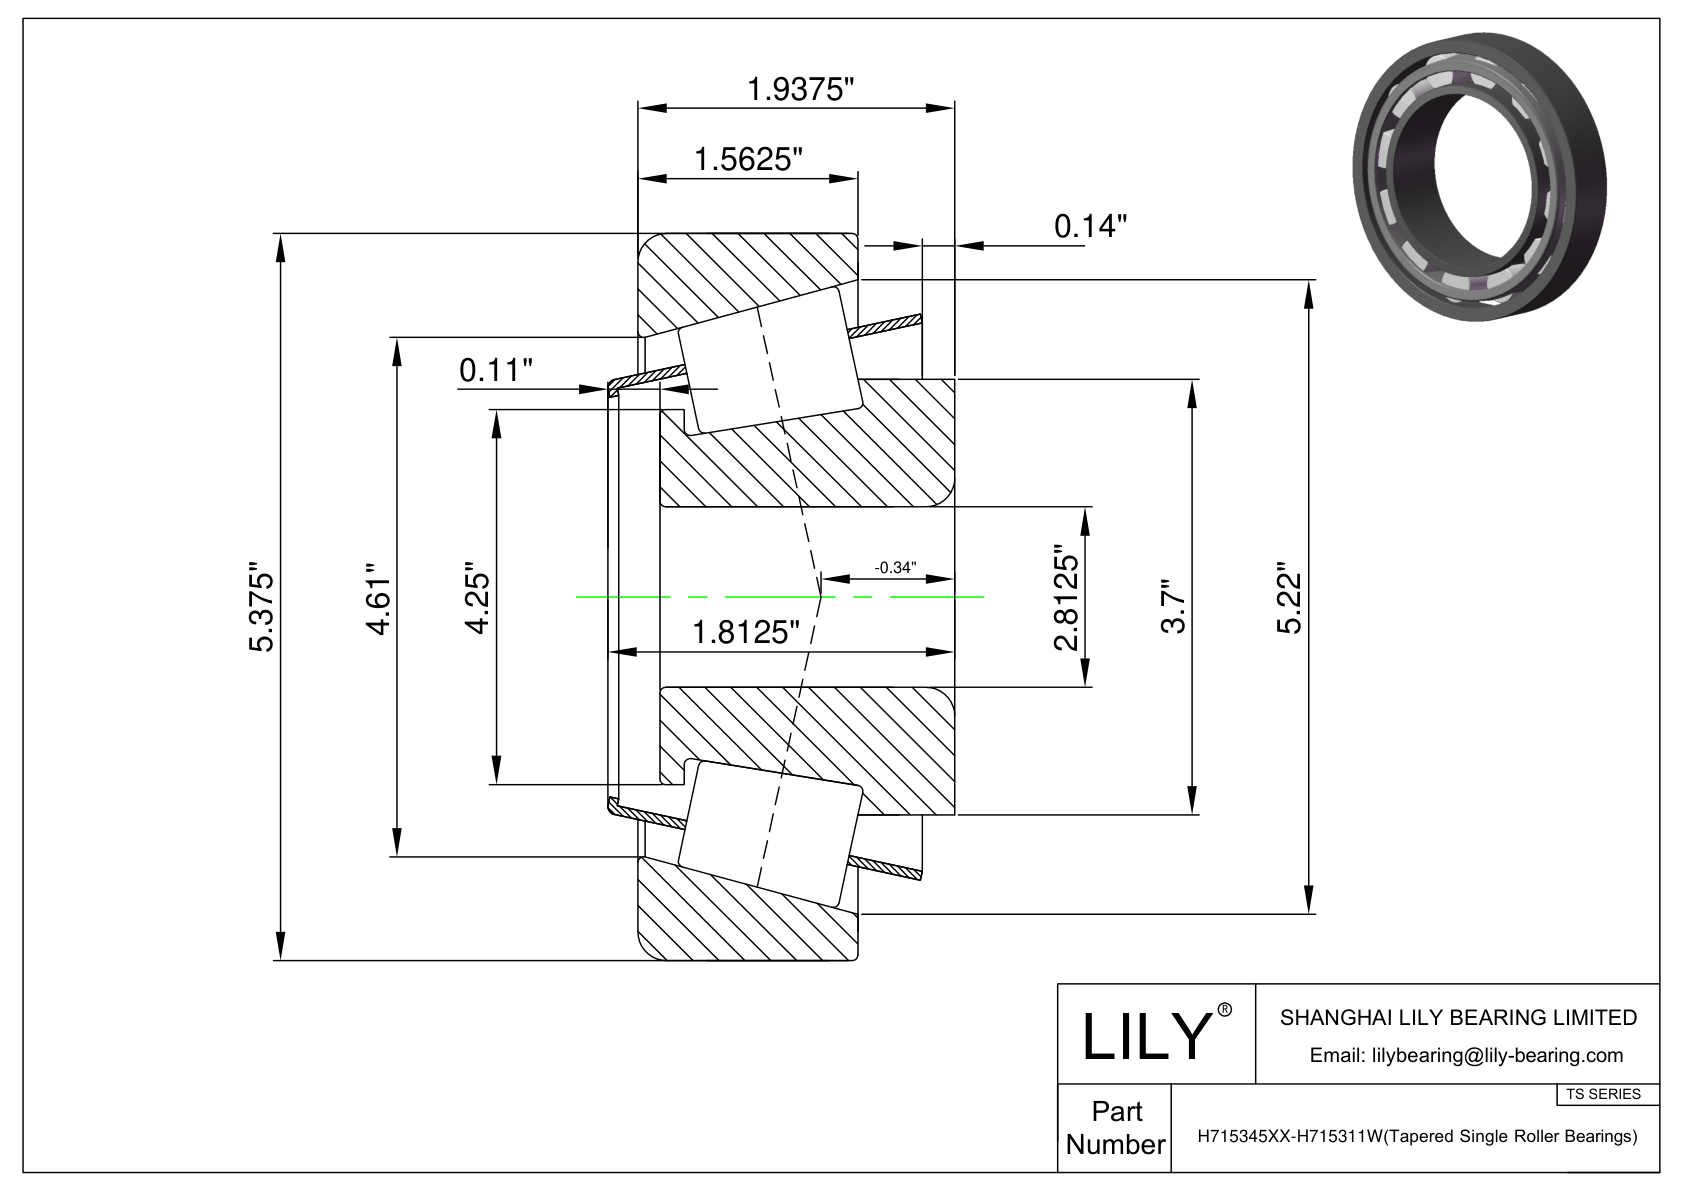 H715345XX-H715311W TS (Tapered Single Roller Bearings) (Imperial) cad drawing